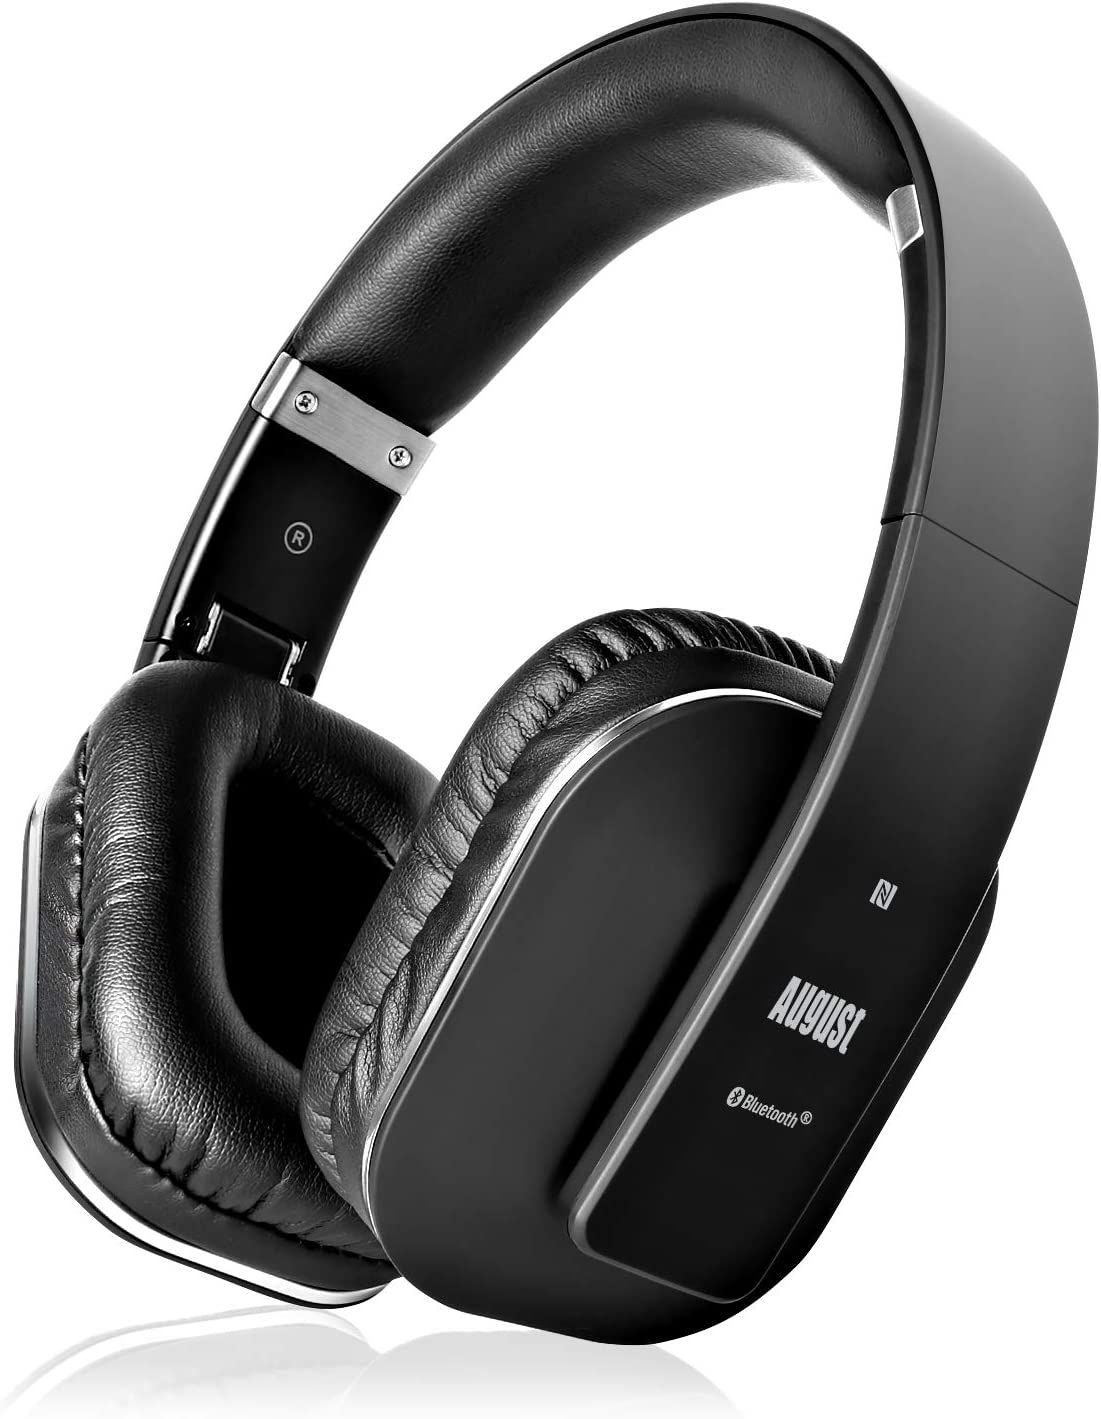 Product image of August EP650 headphones